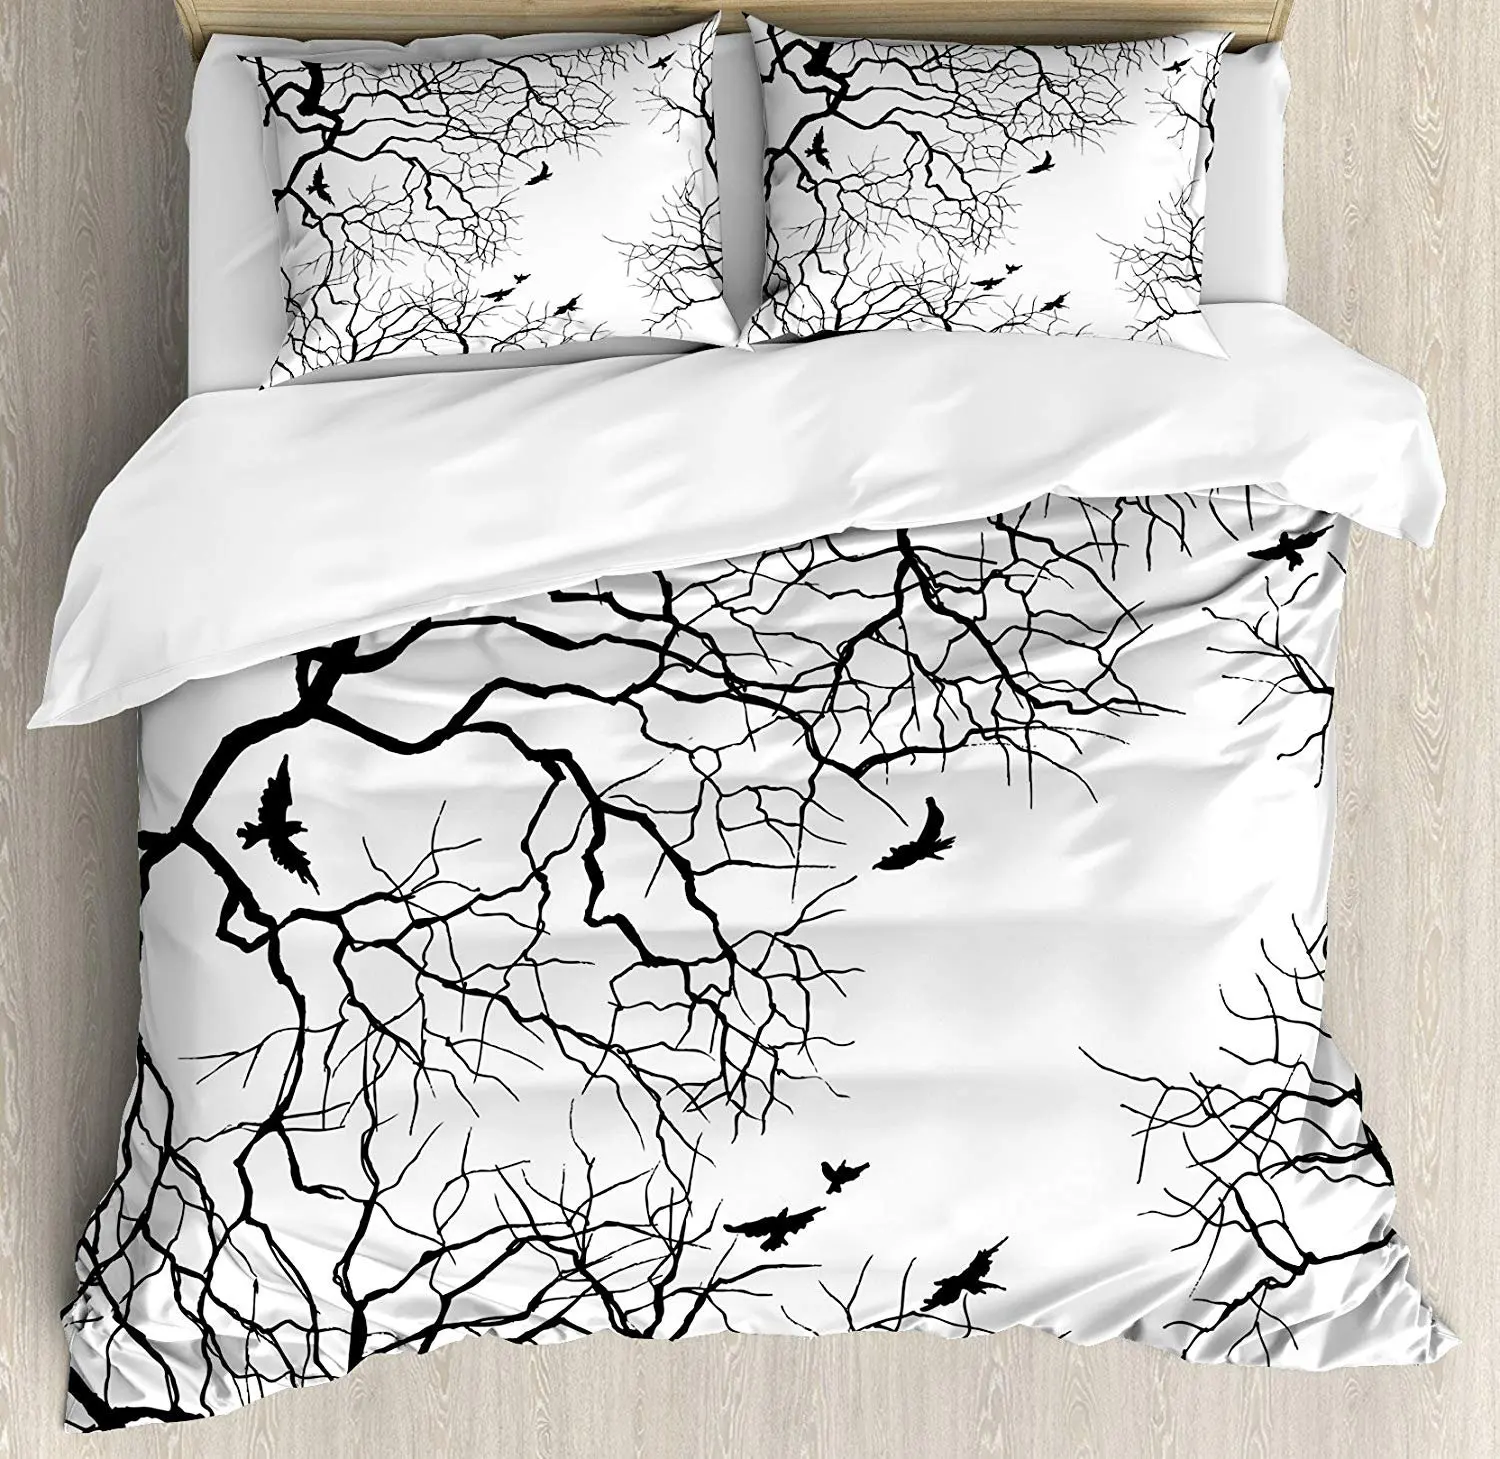 

Nature Bedding Set Birds Flying over Twiggy Tree Branches Stylish Autumn Season Sky View Artwork Duvet Cover Pillowcase Bed Set